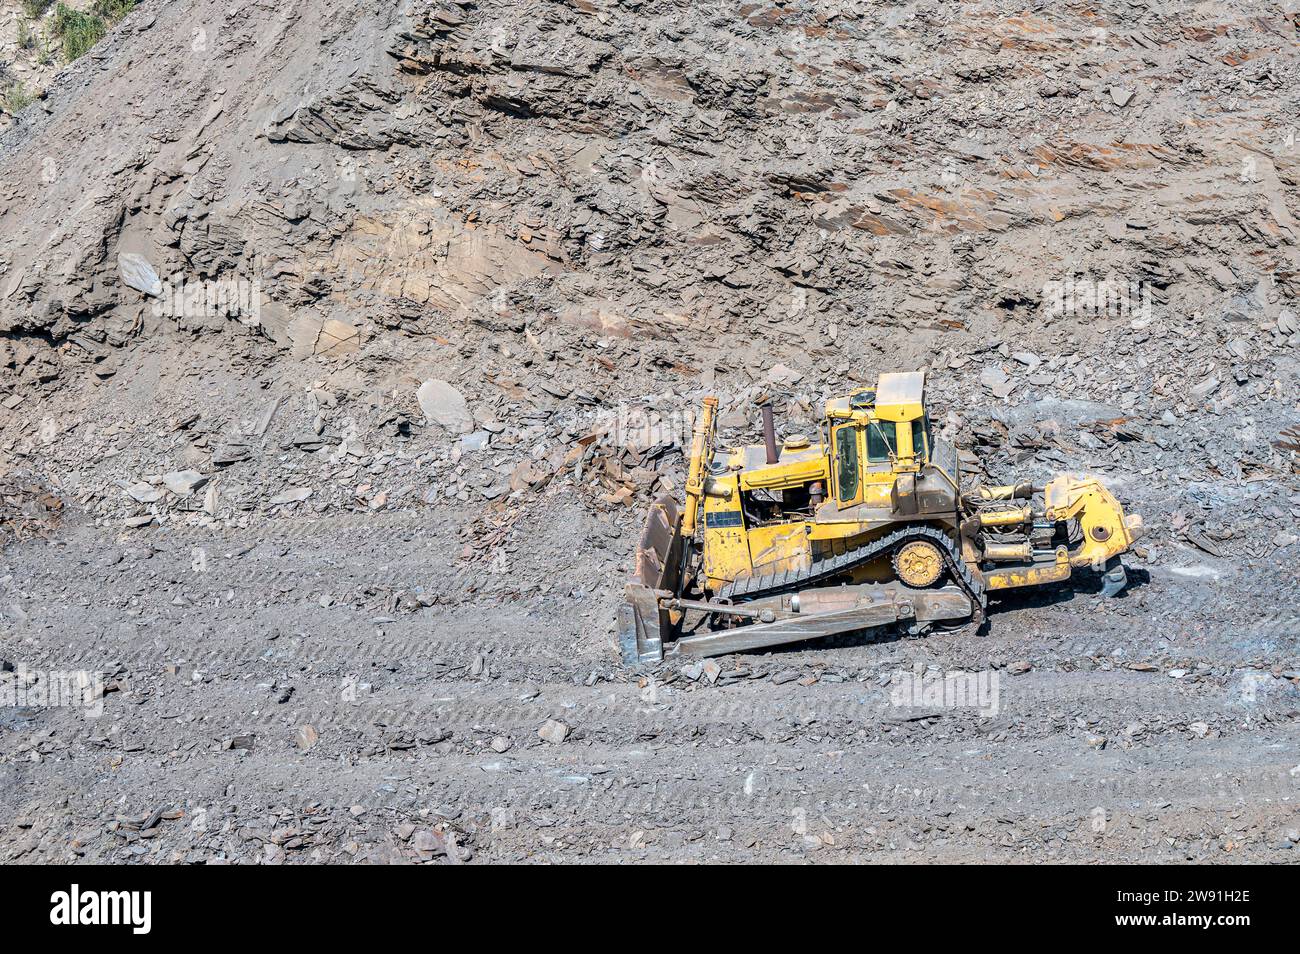 Heavy machinery in the process of mountain road construction works in Saudi Arabia Stock Photo